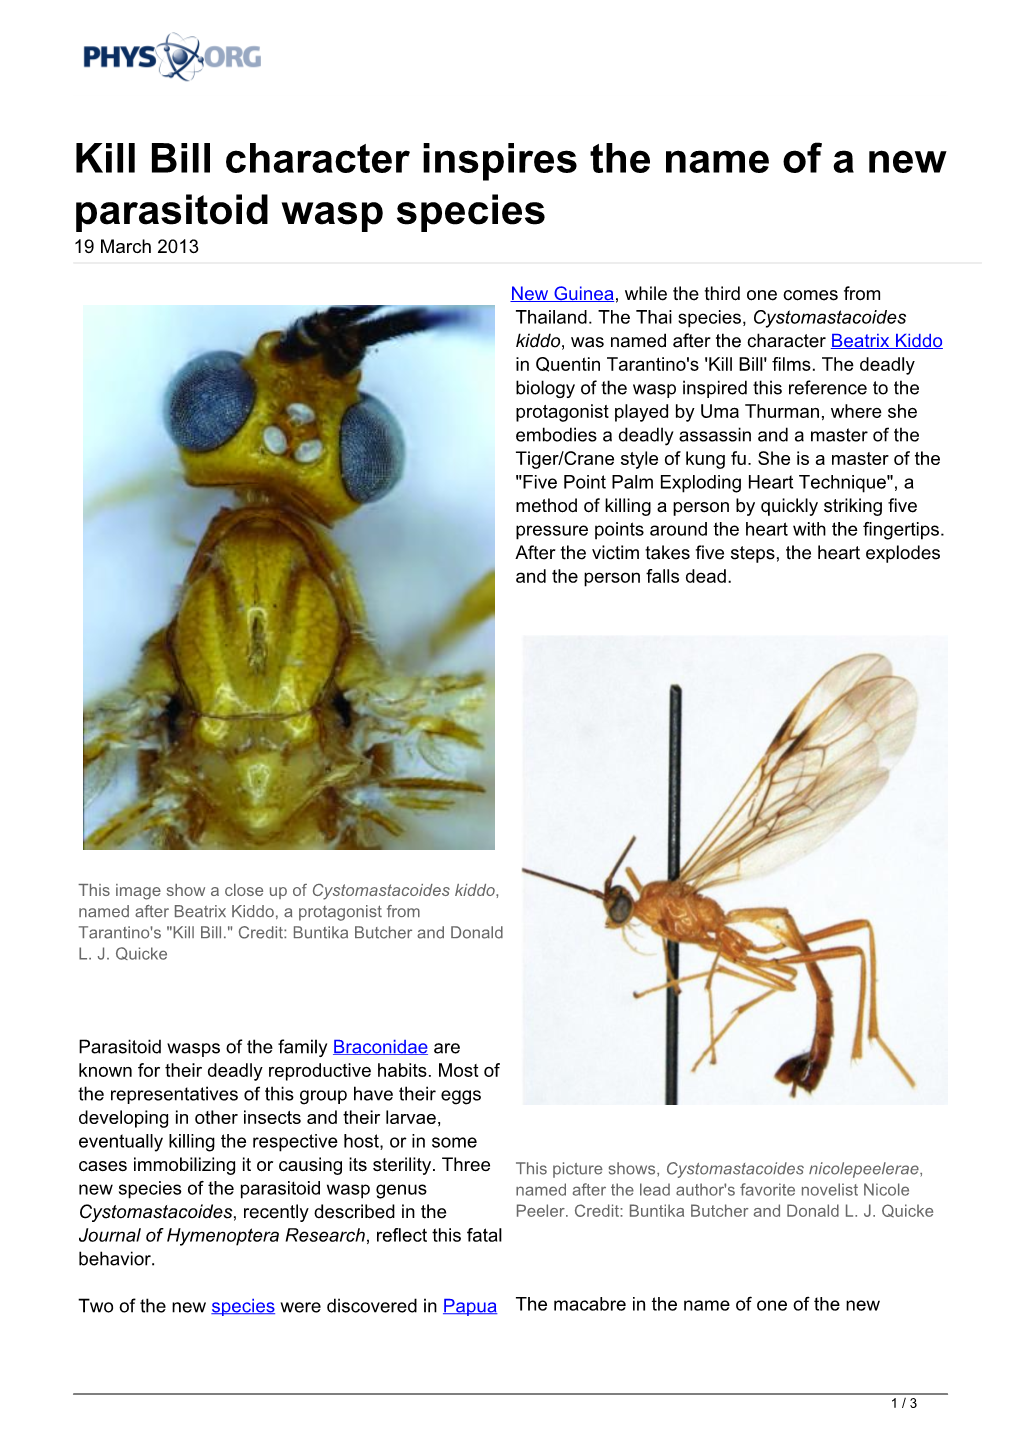 Kill Bill Character Inspires the Name of a New Parasitoid Wasp Species 19 March 2013